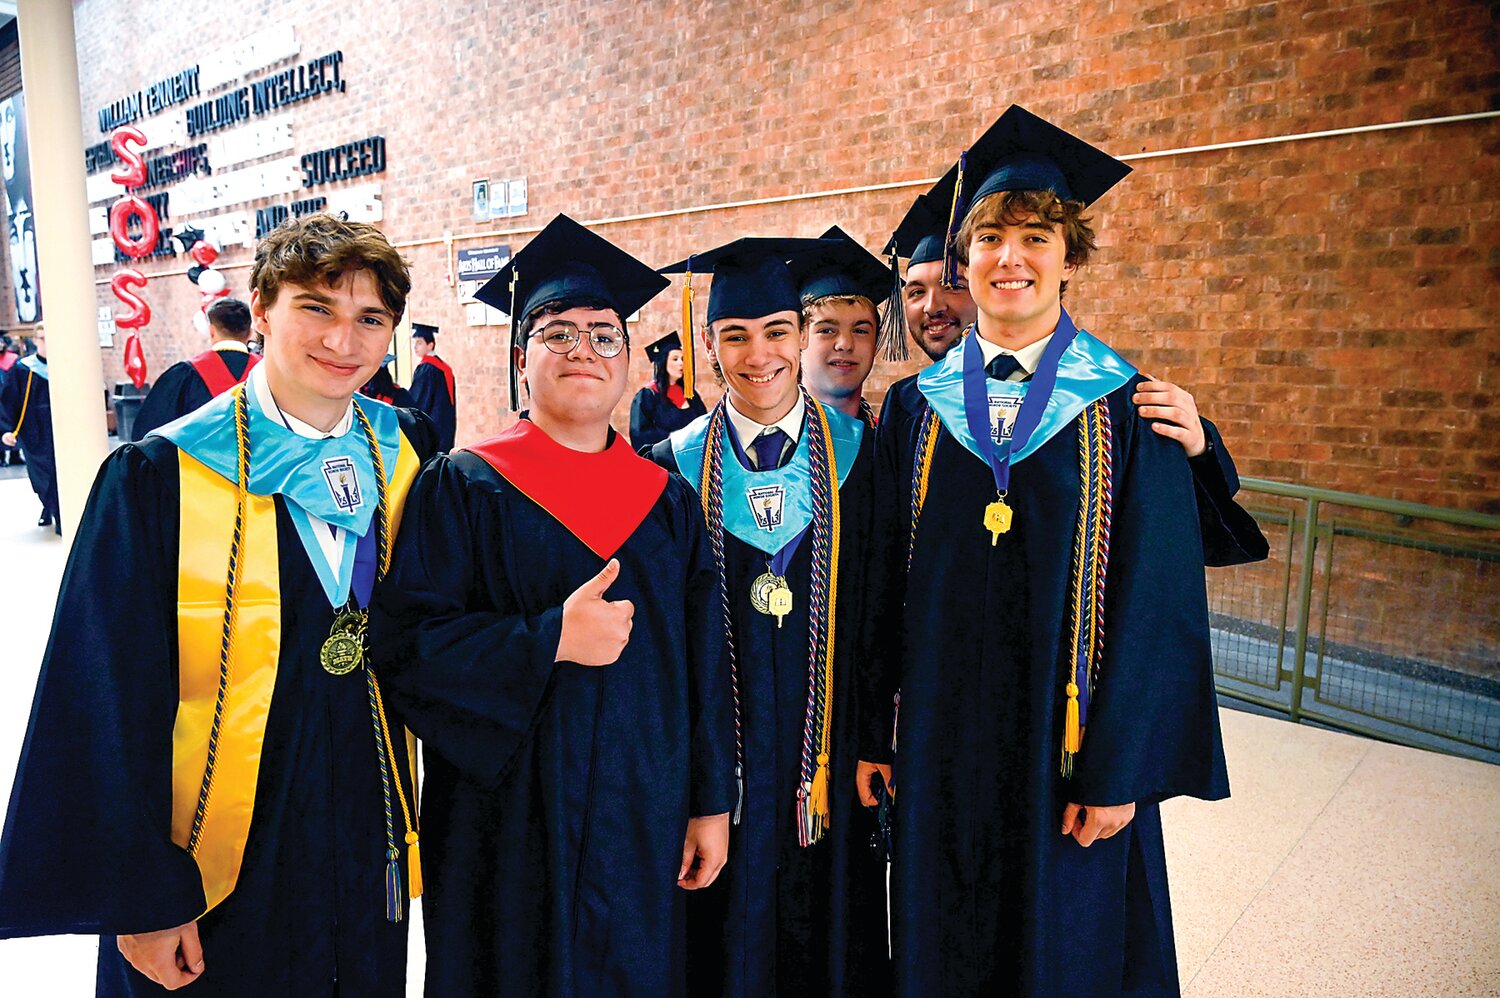 William Tennent students are all smiles ahead of their graduation ceremony.